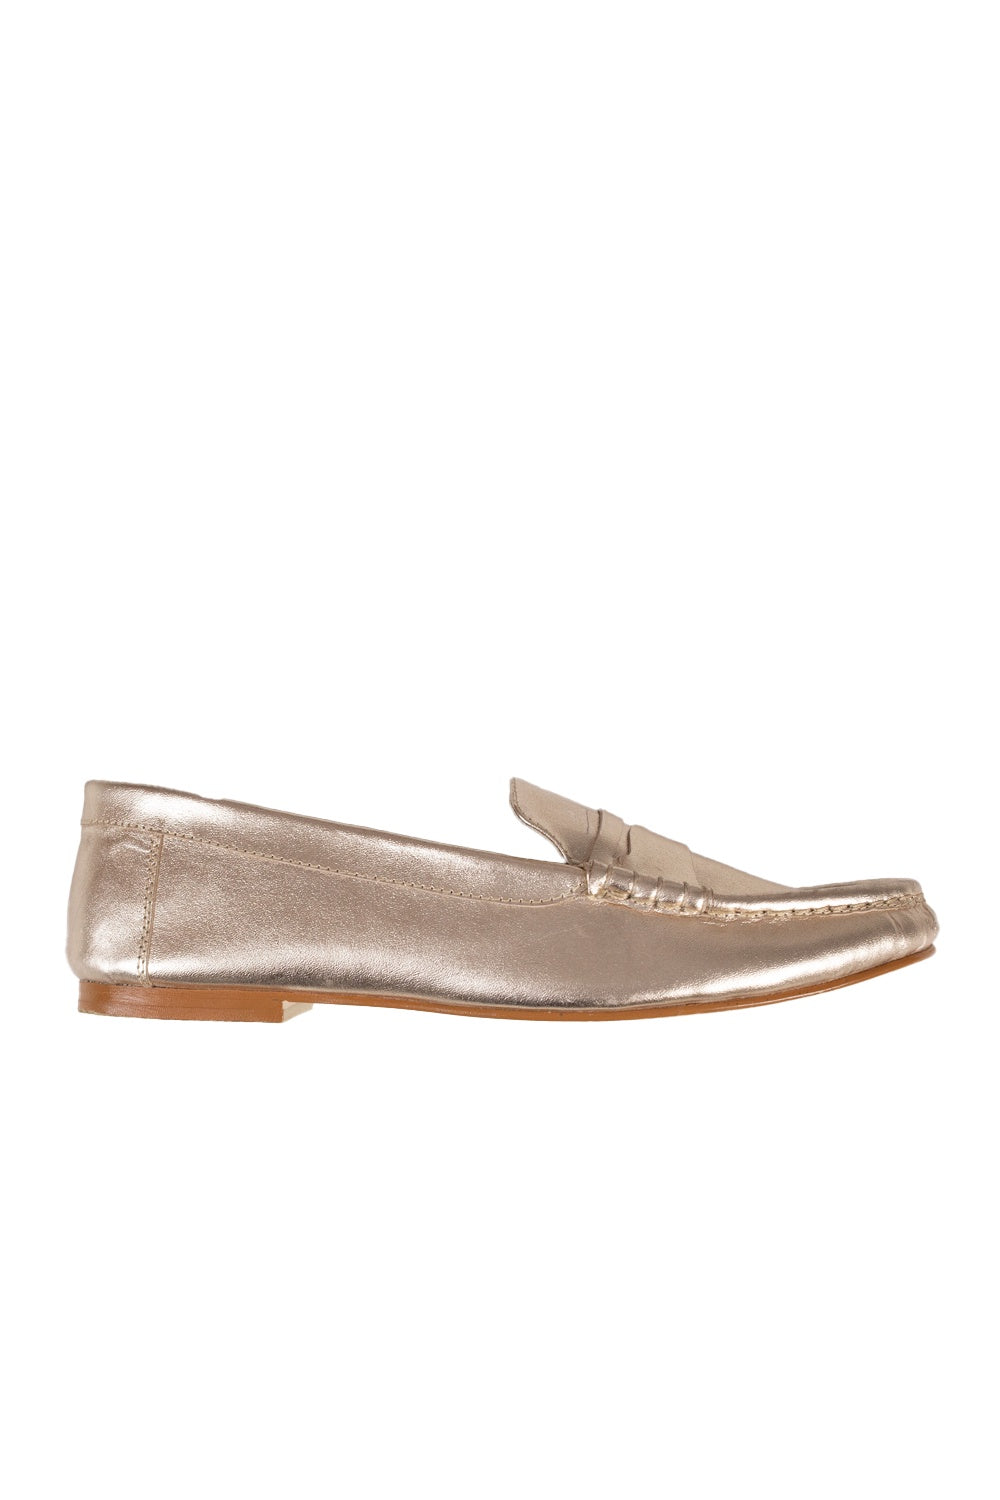 Lillian Leather Loafers in Gold - Carolina